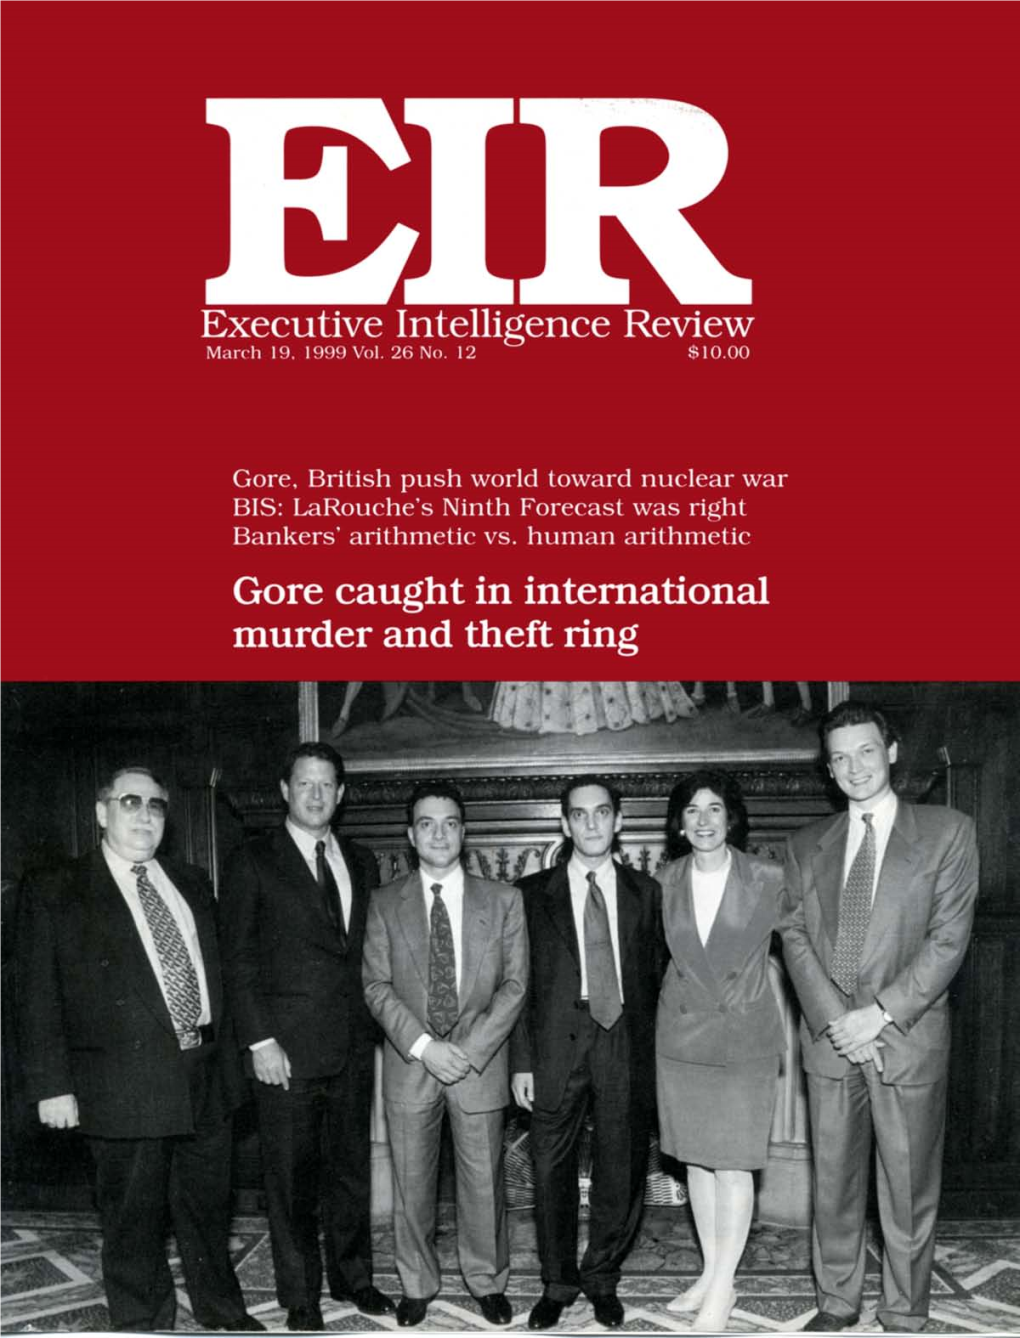 Executive Intelligence Review, Volume 26, Number 12, March 19